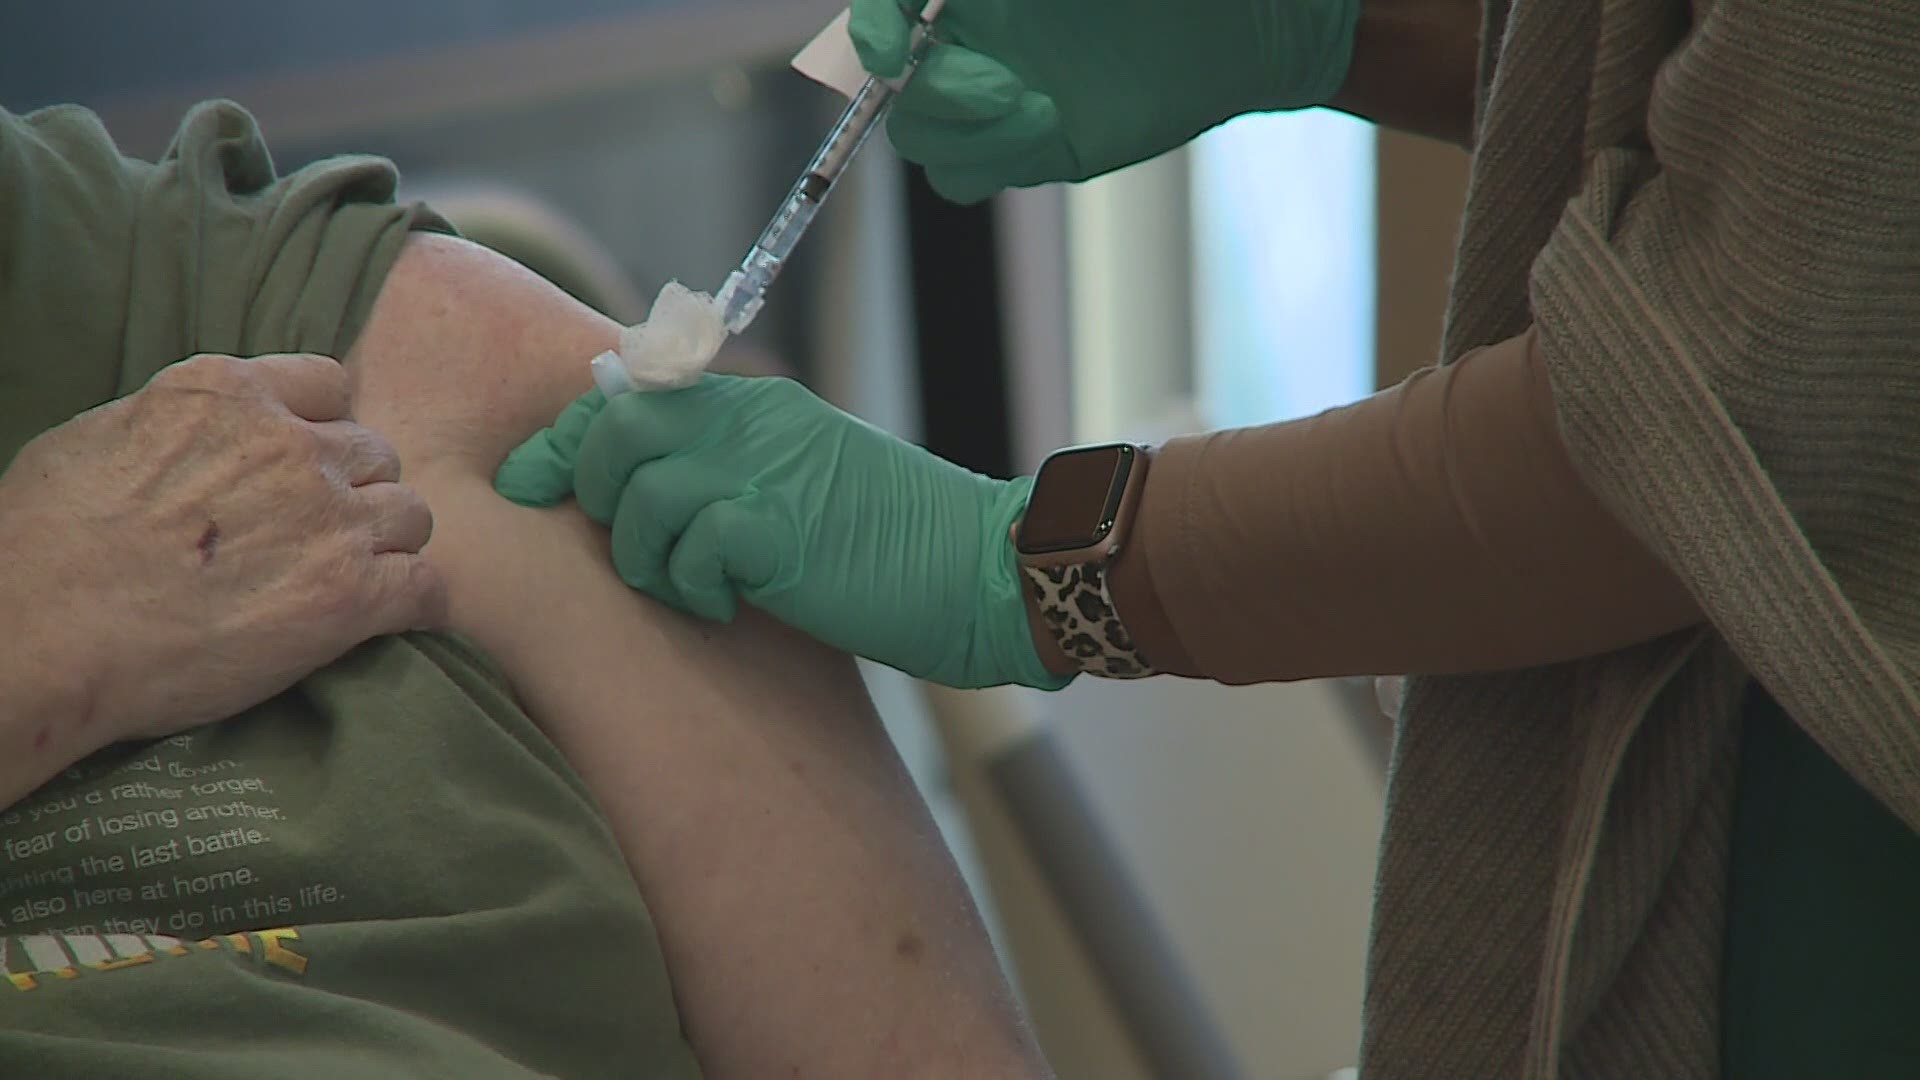 Several doctors in south Louisiana expressed optimism that a new emphasis on getting shots out will speed things up.